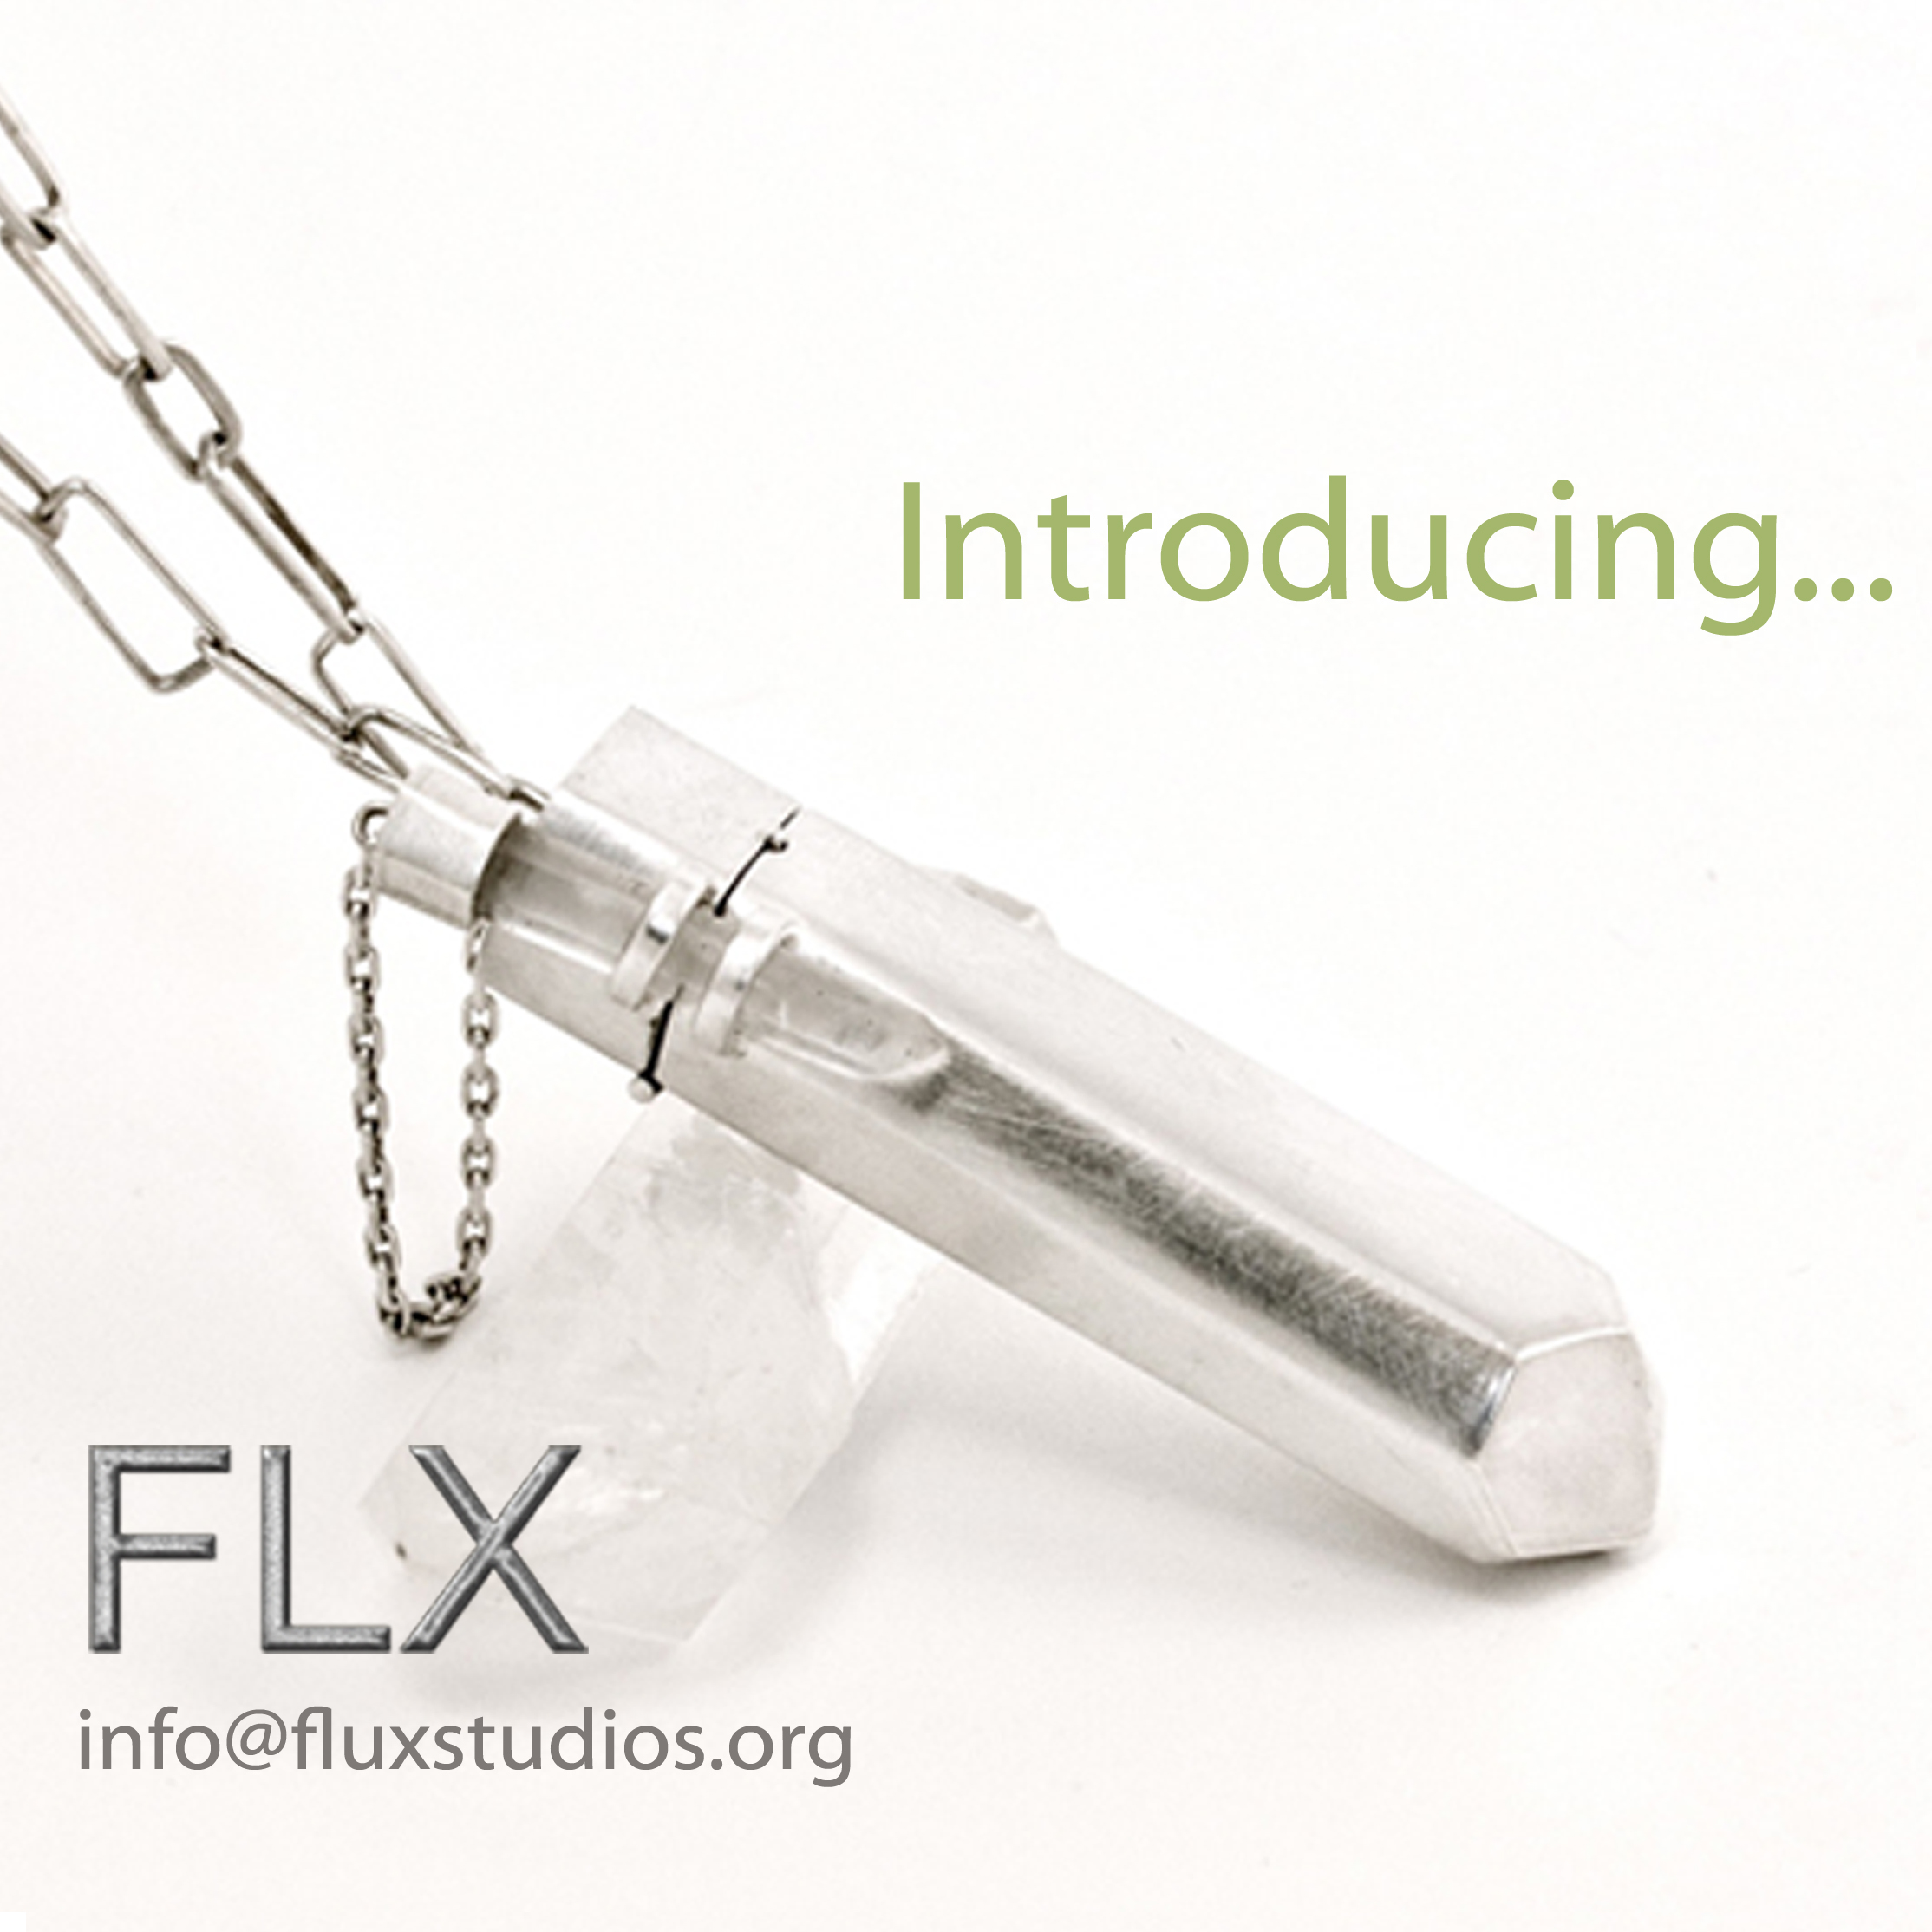 One year study programme leading to the Flux certificate in jewellery